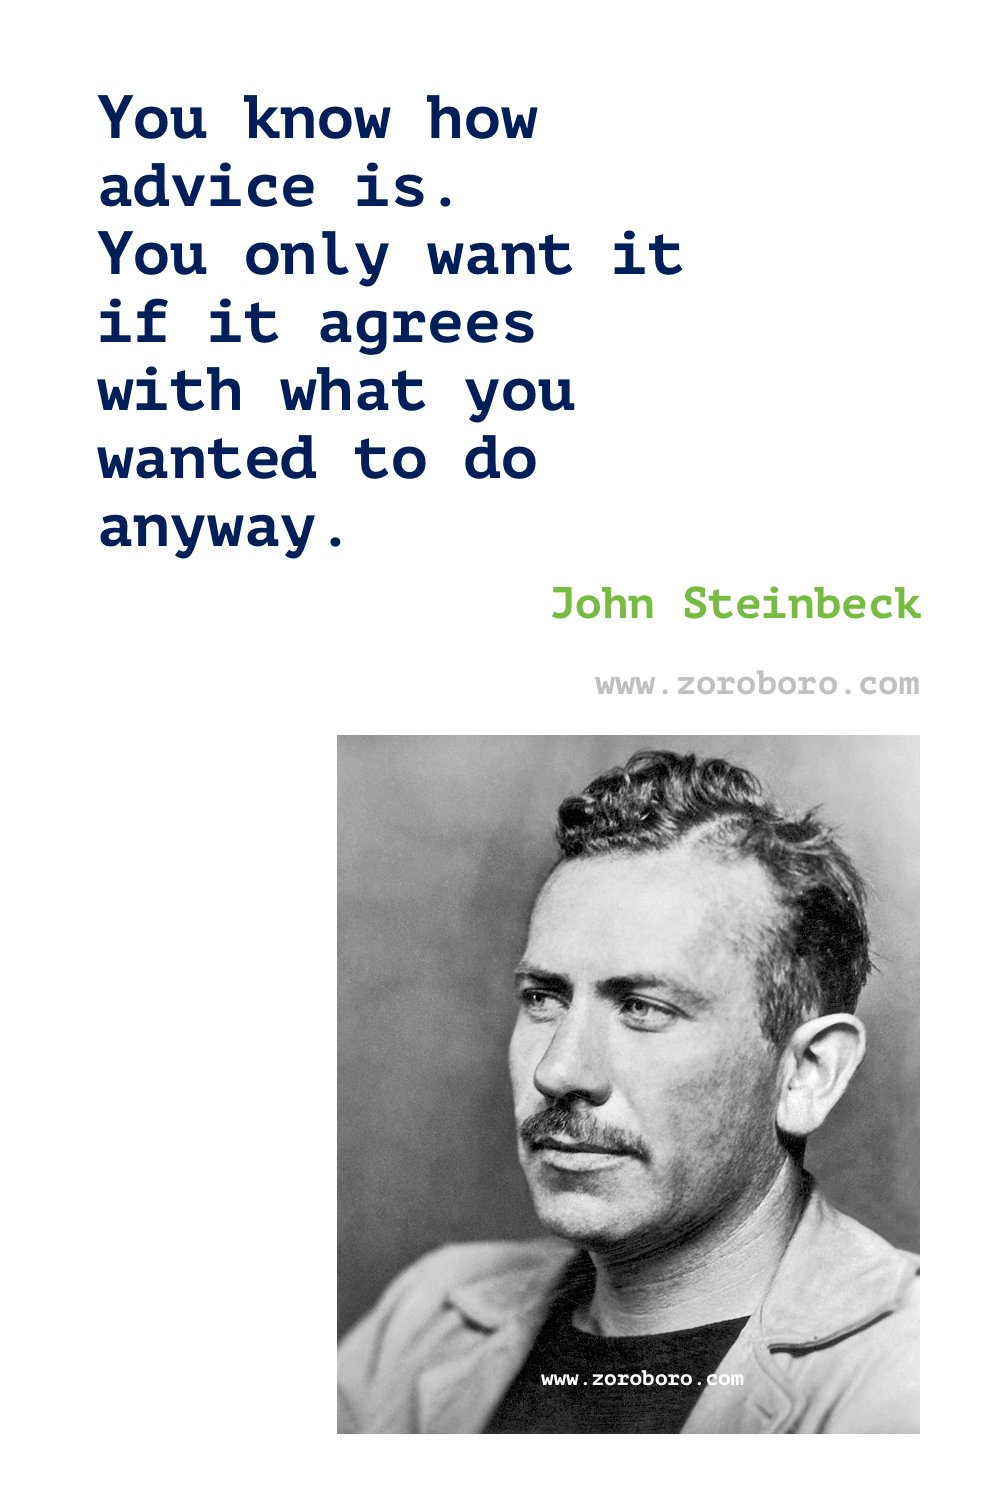 John Steinbeck Quotes. John Steinbeck East of Eden Book Quotes. The Grapes of Wrath Quotes. John Steinbeck Writing Quotes. John Steinbeck Books Quotes.